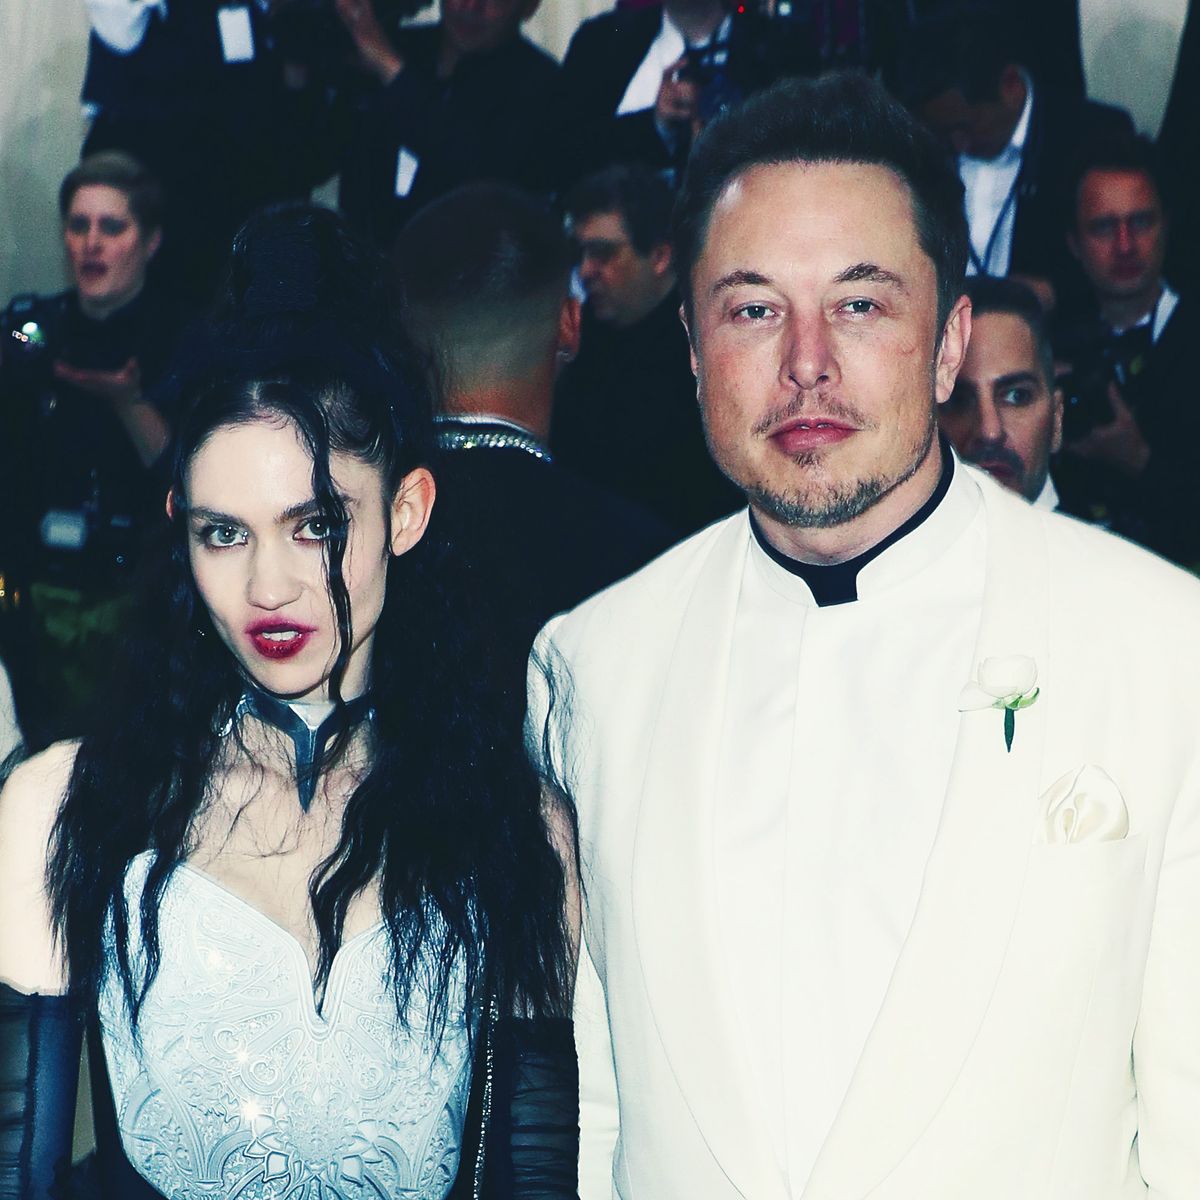 Grimes S Mom Doesn T Appear To Like Elon Musk